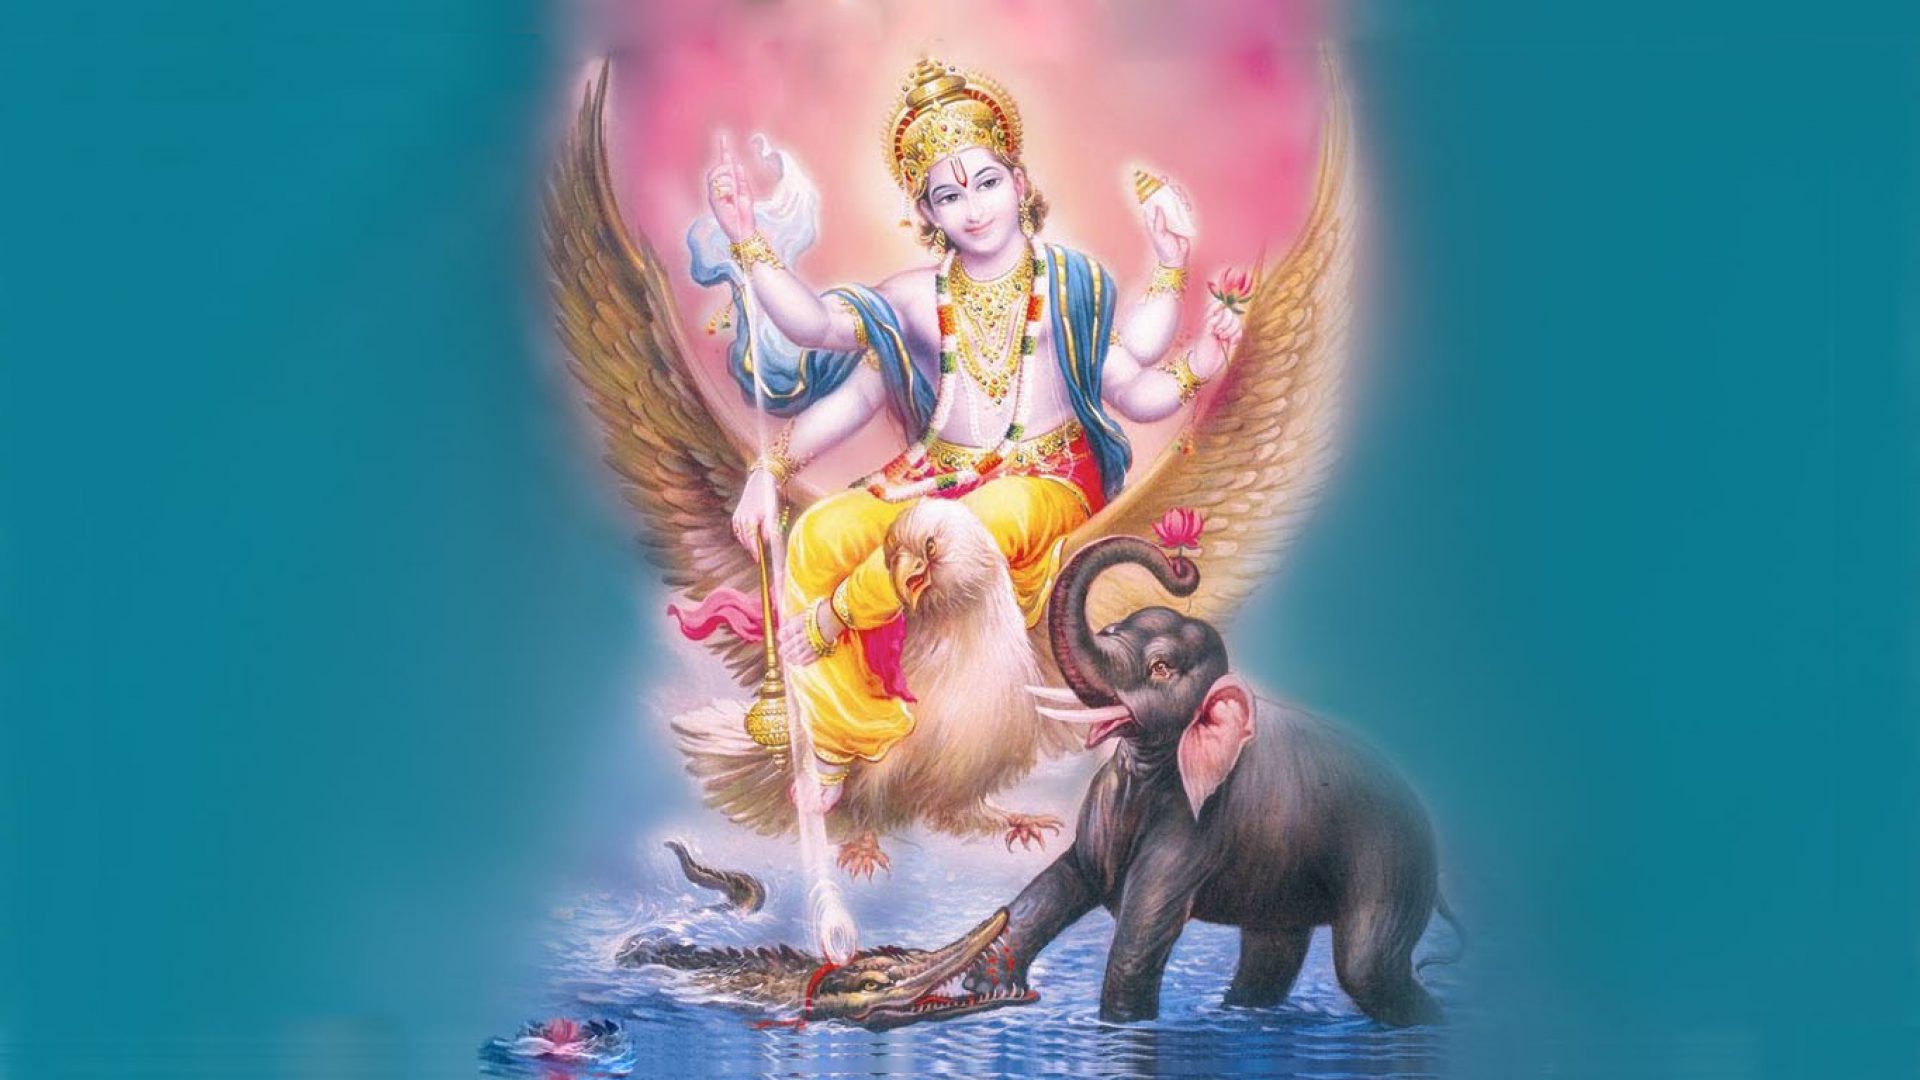 Beautiful Pictures Of Lord Vishnu - God HD Wallpapers